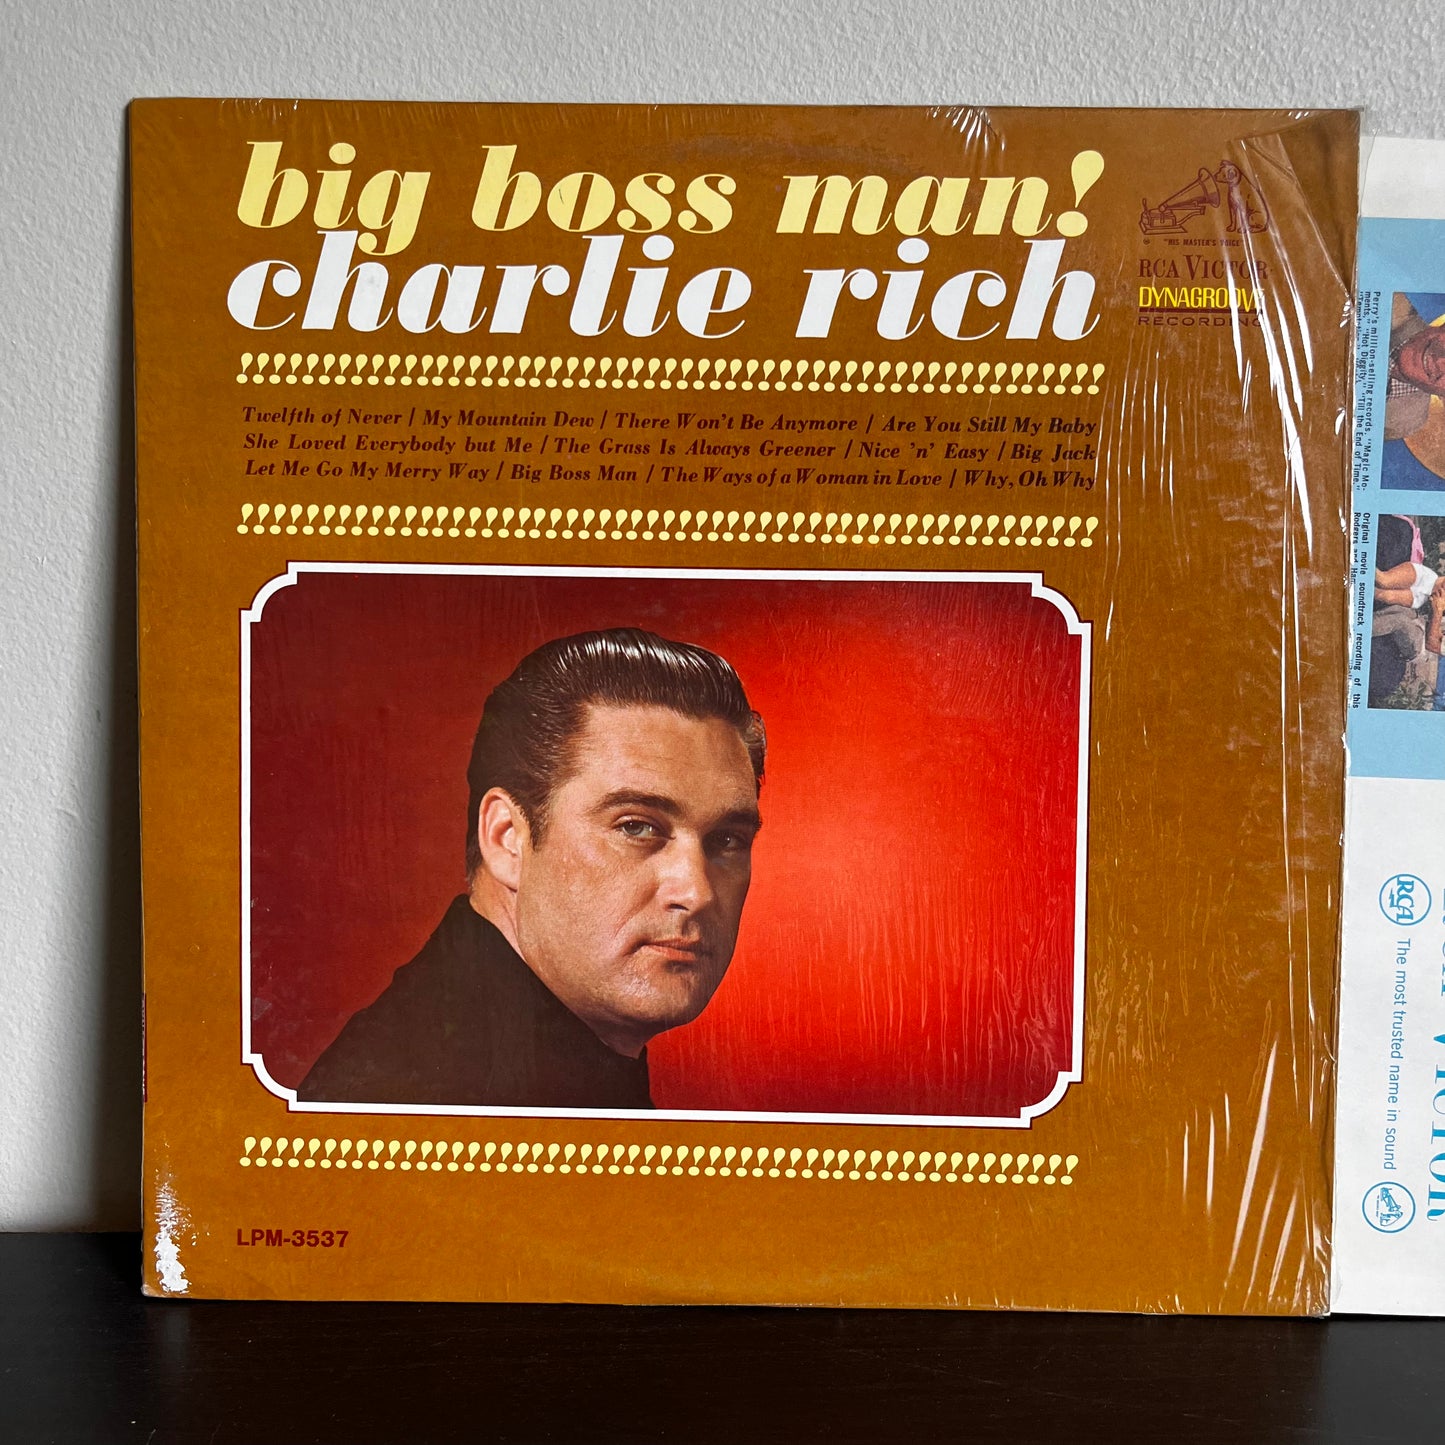 Big Boss Man! - Charlie Rich RCA LPM-3537 Used in NM Condition